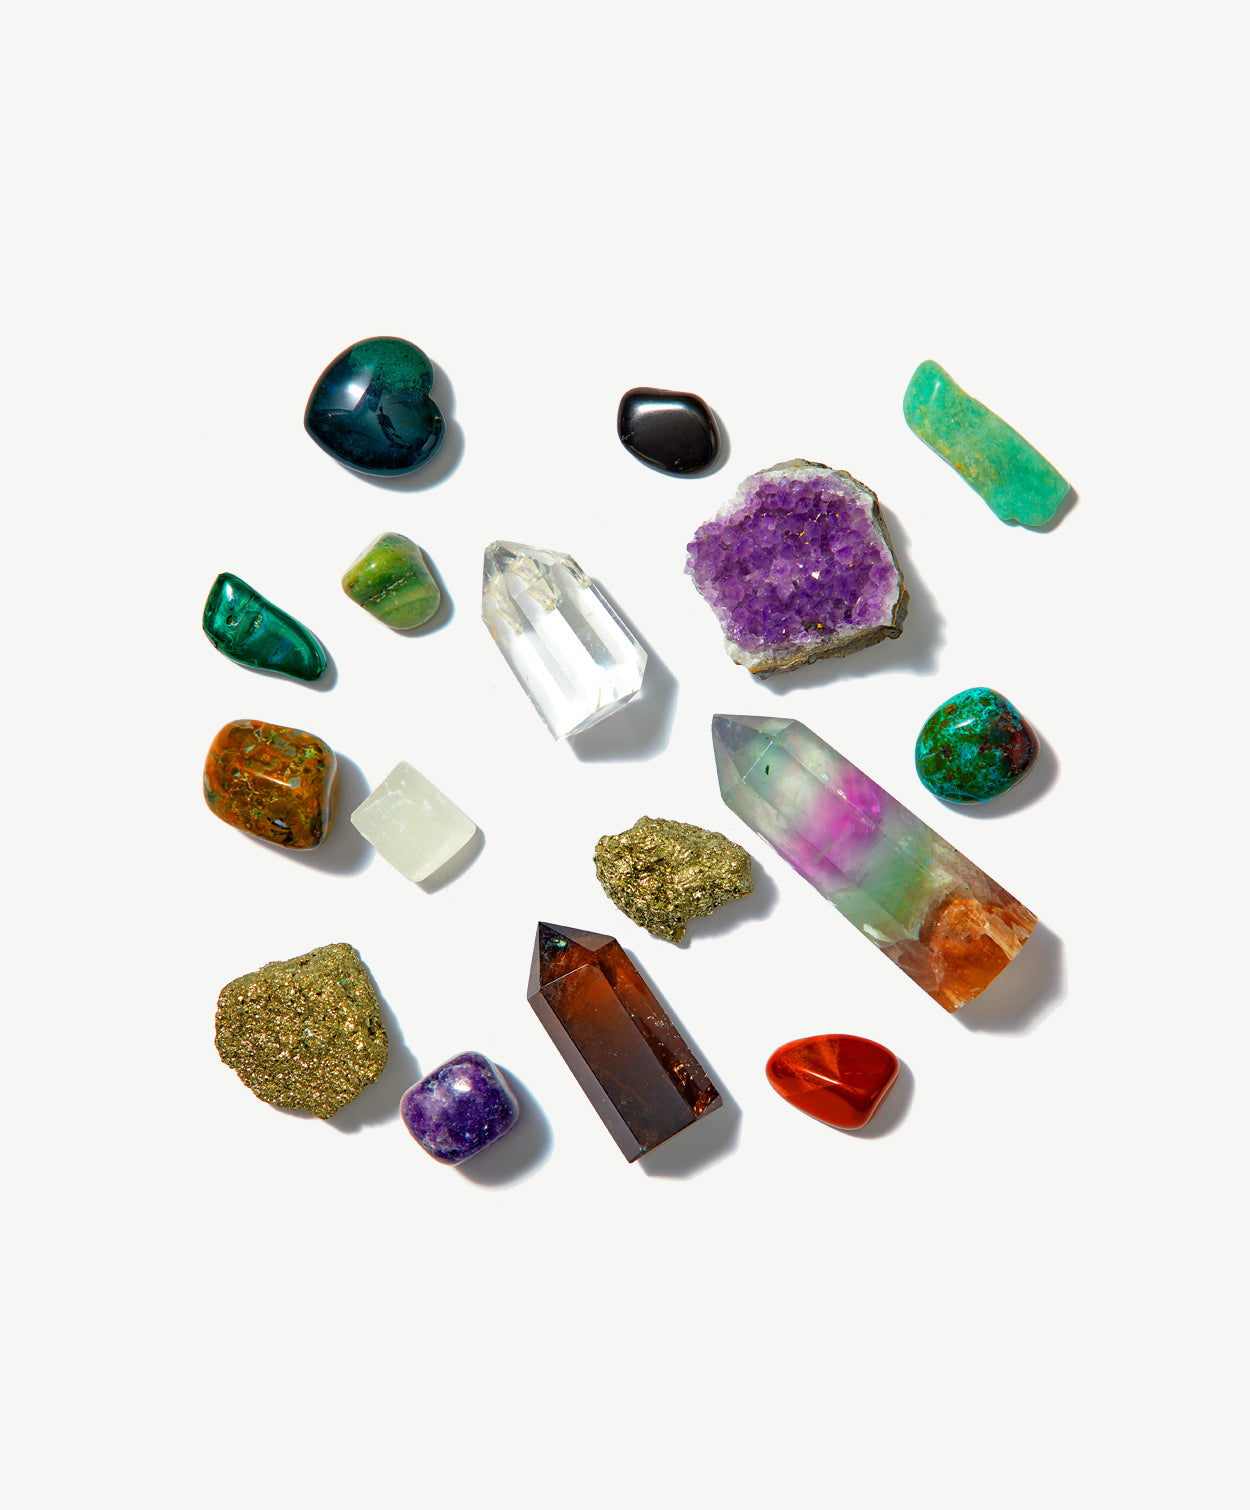 Sixteen brightly colored crystals and precious stones sit scattered on a grey background. 